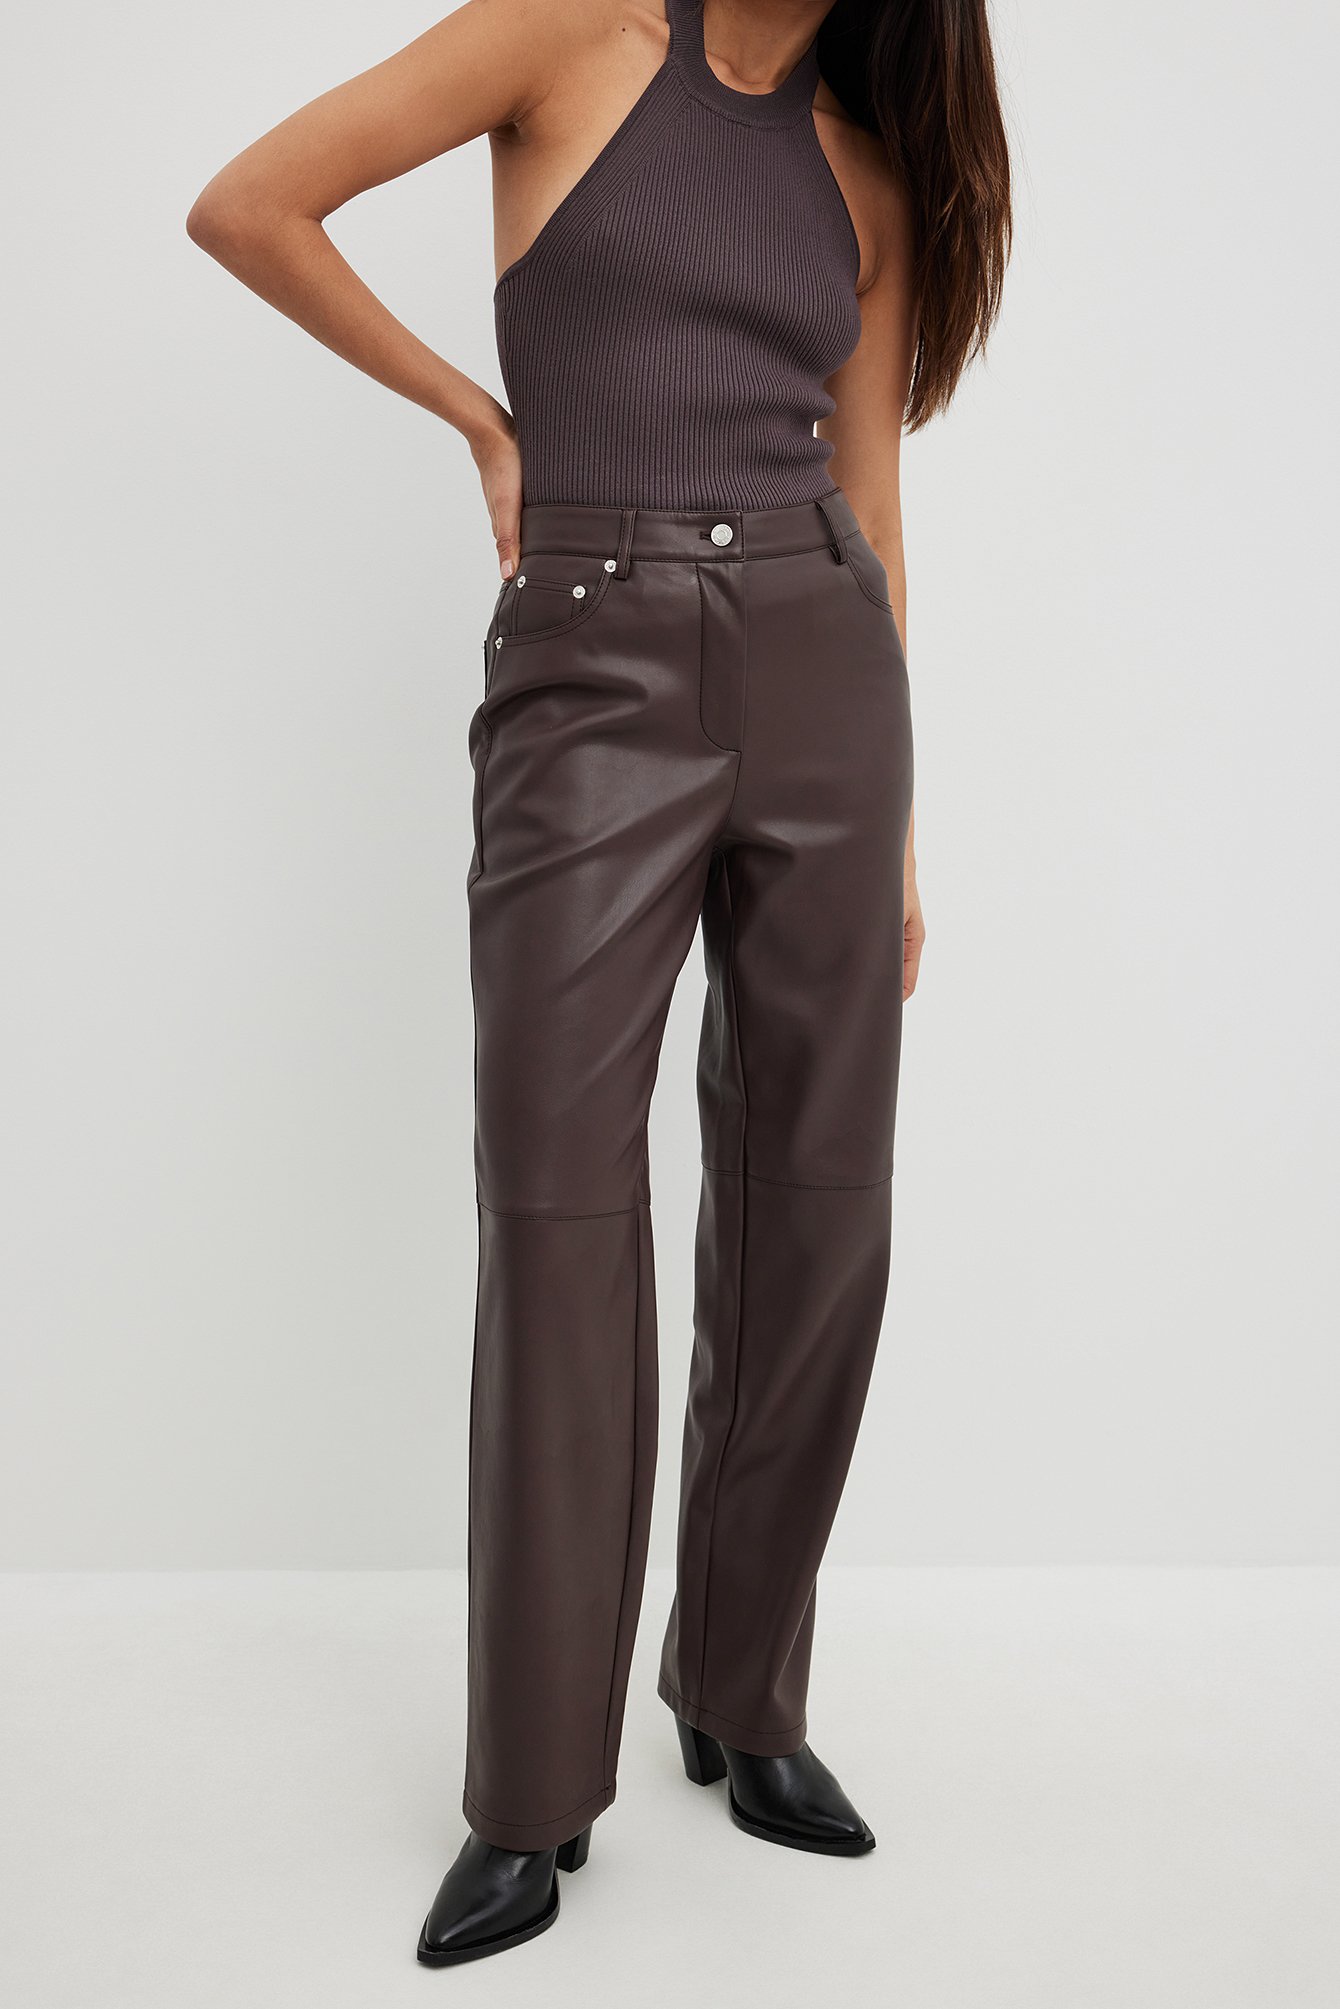 MISBHV Brown Faux-Leather Trousers MISBHV